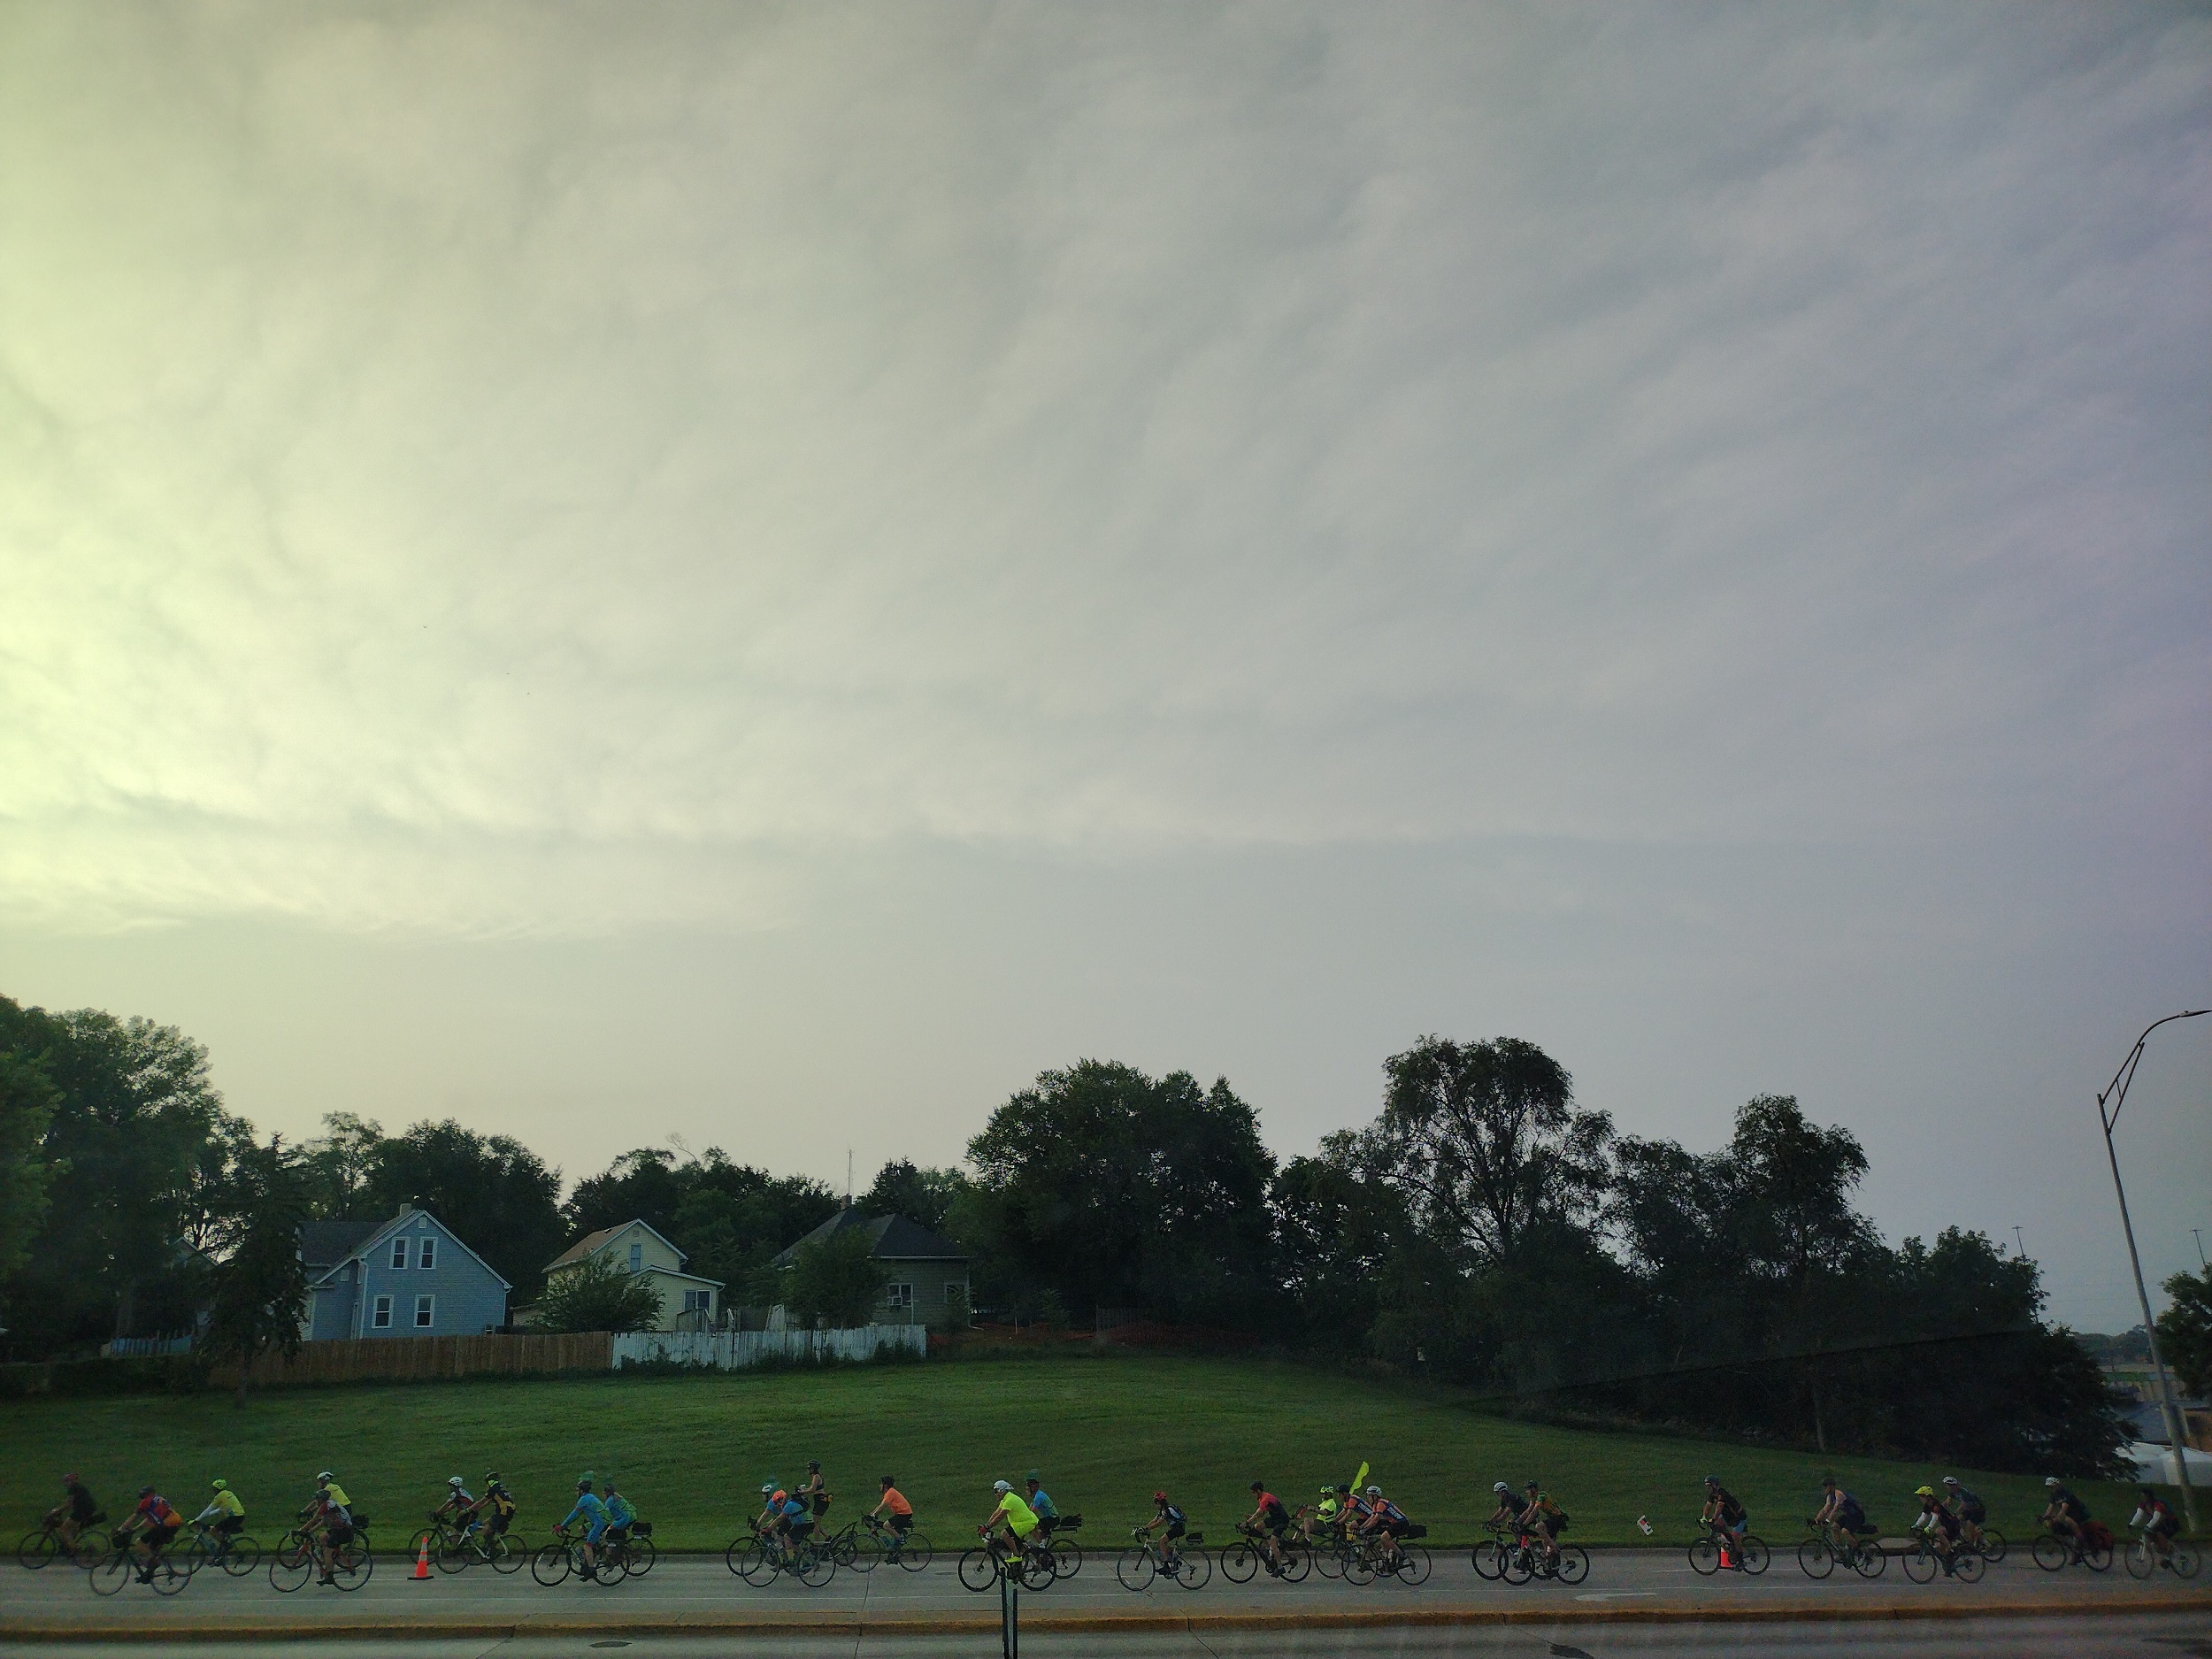 A stream of bike riders on the street in the morning light.